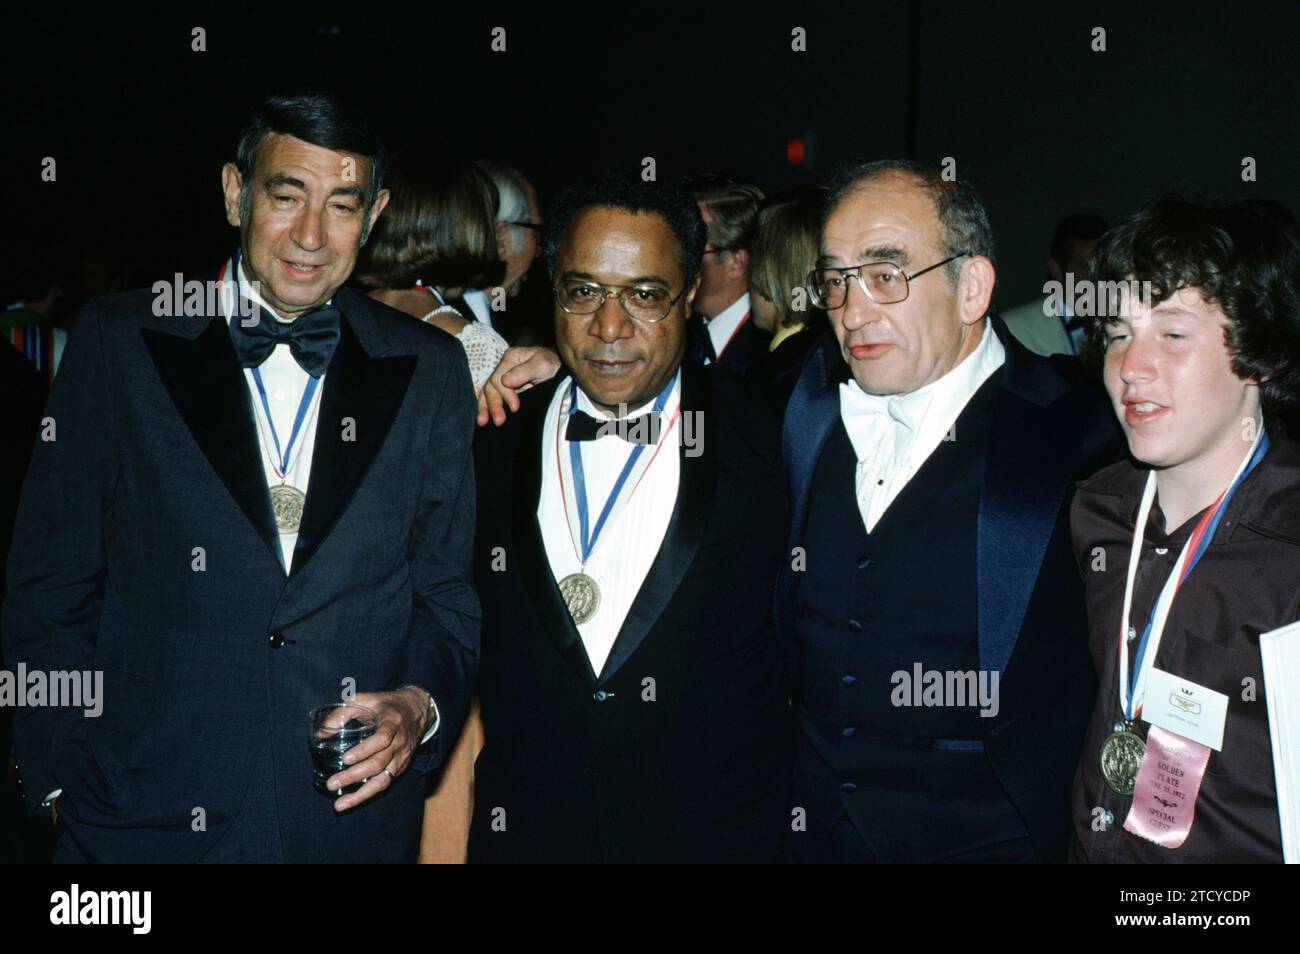 MALIBU, CA - JUNE 25:  Sport announcer Howard Cosell, actor Ed Asner and his son Matthew Asner pose for a portrait during the 1977 Banquet of the Golden Plate on June 25, 1977 in Malibu, California.   (Photo by Hy Peskin) *** Local Caption *** Howard Cosell;Ed Asner;Matthew Asner Stock Photo